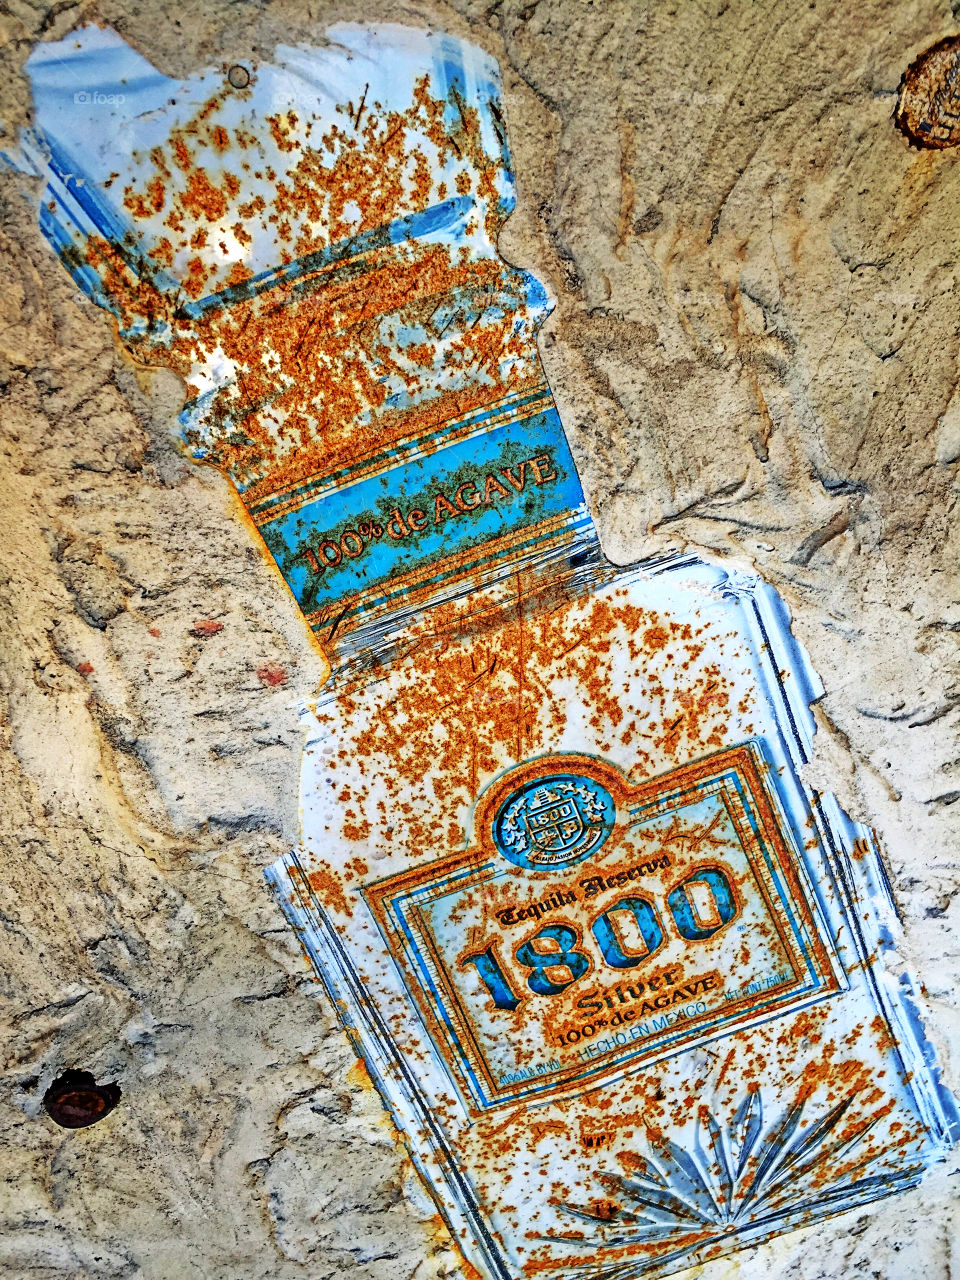 Tequila reserva 1800 rusty advertising at an outdoor tiki bar.